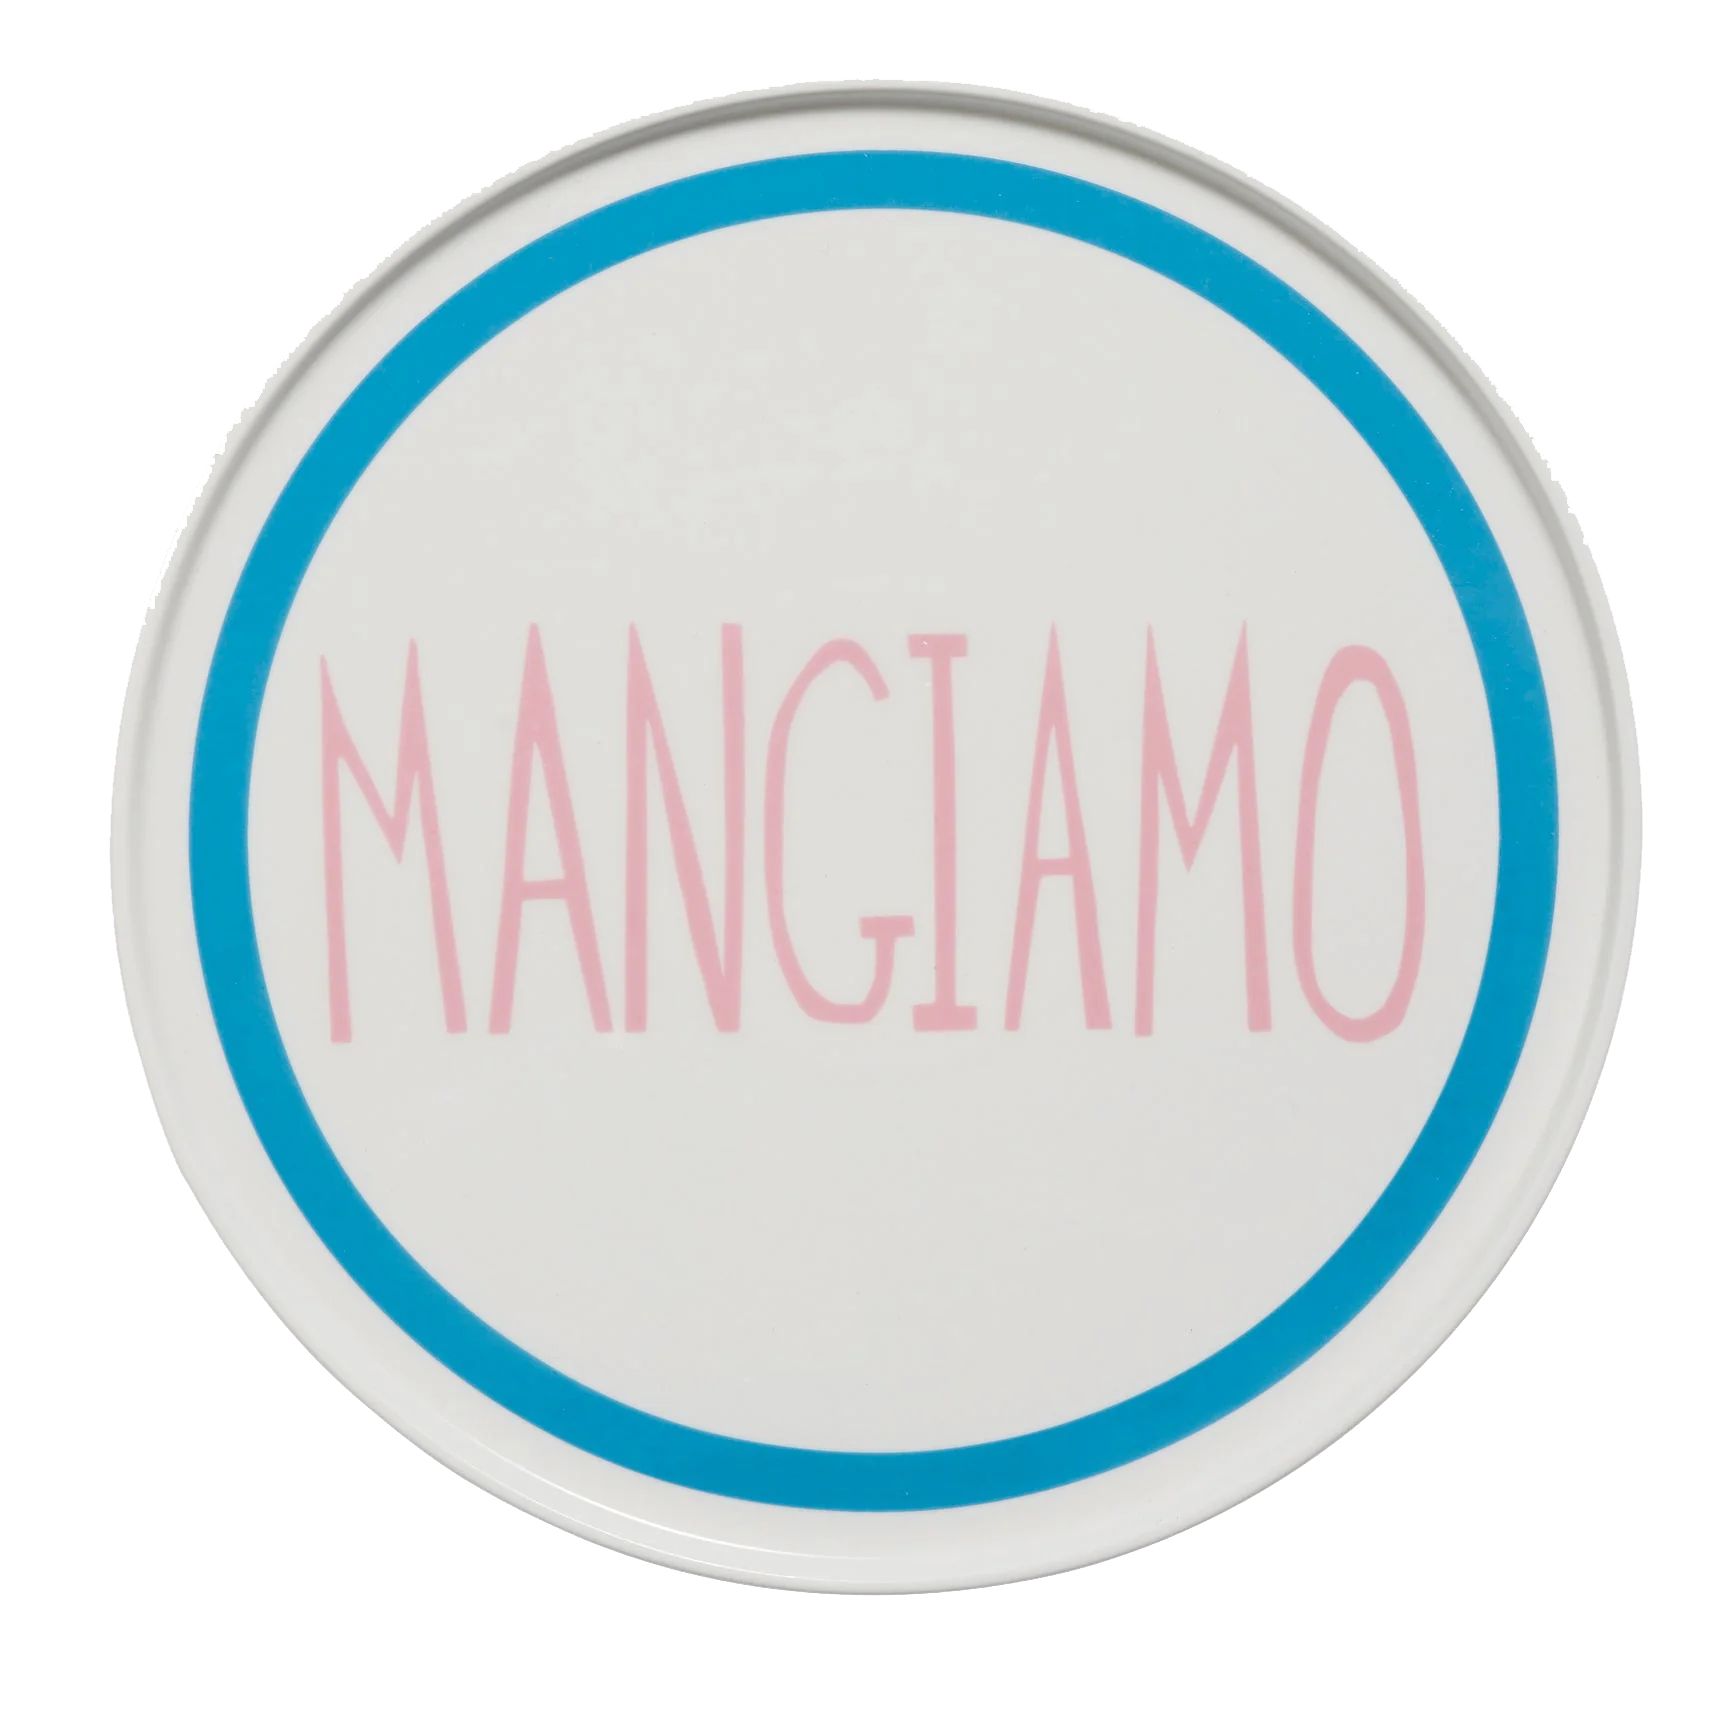 Mangiamo Plate | In the Roundhouse